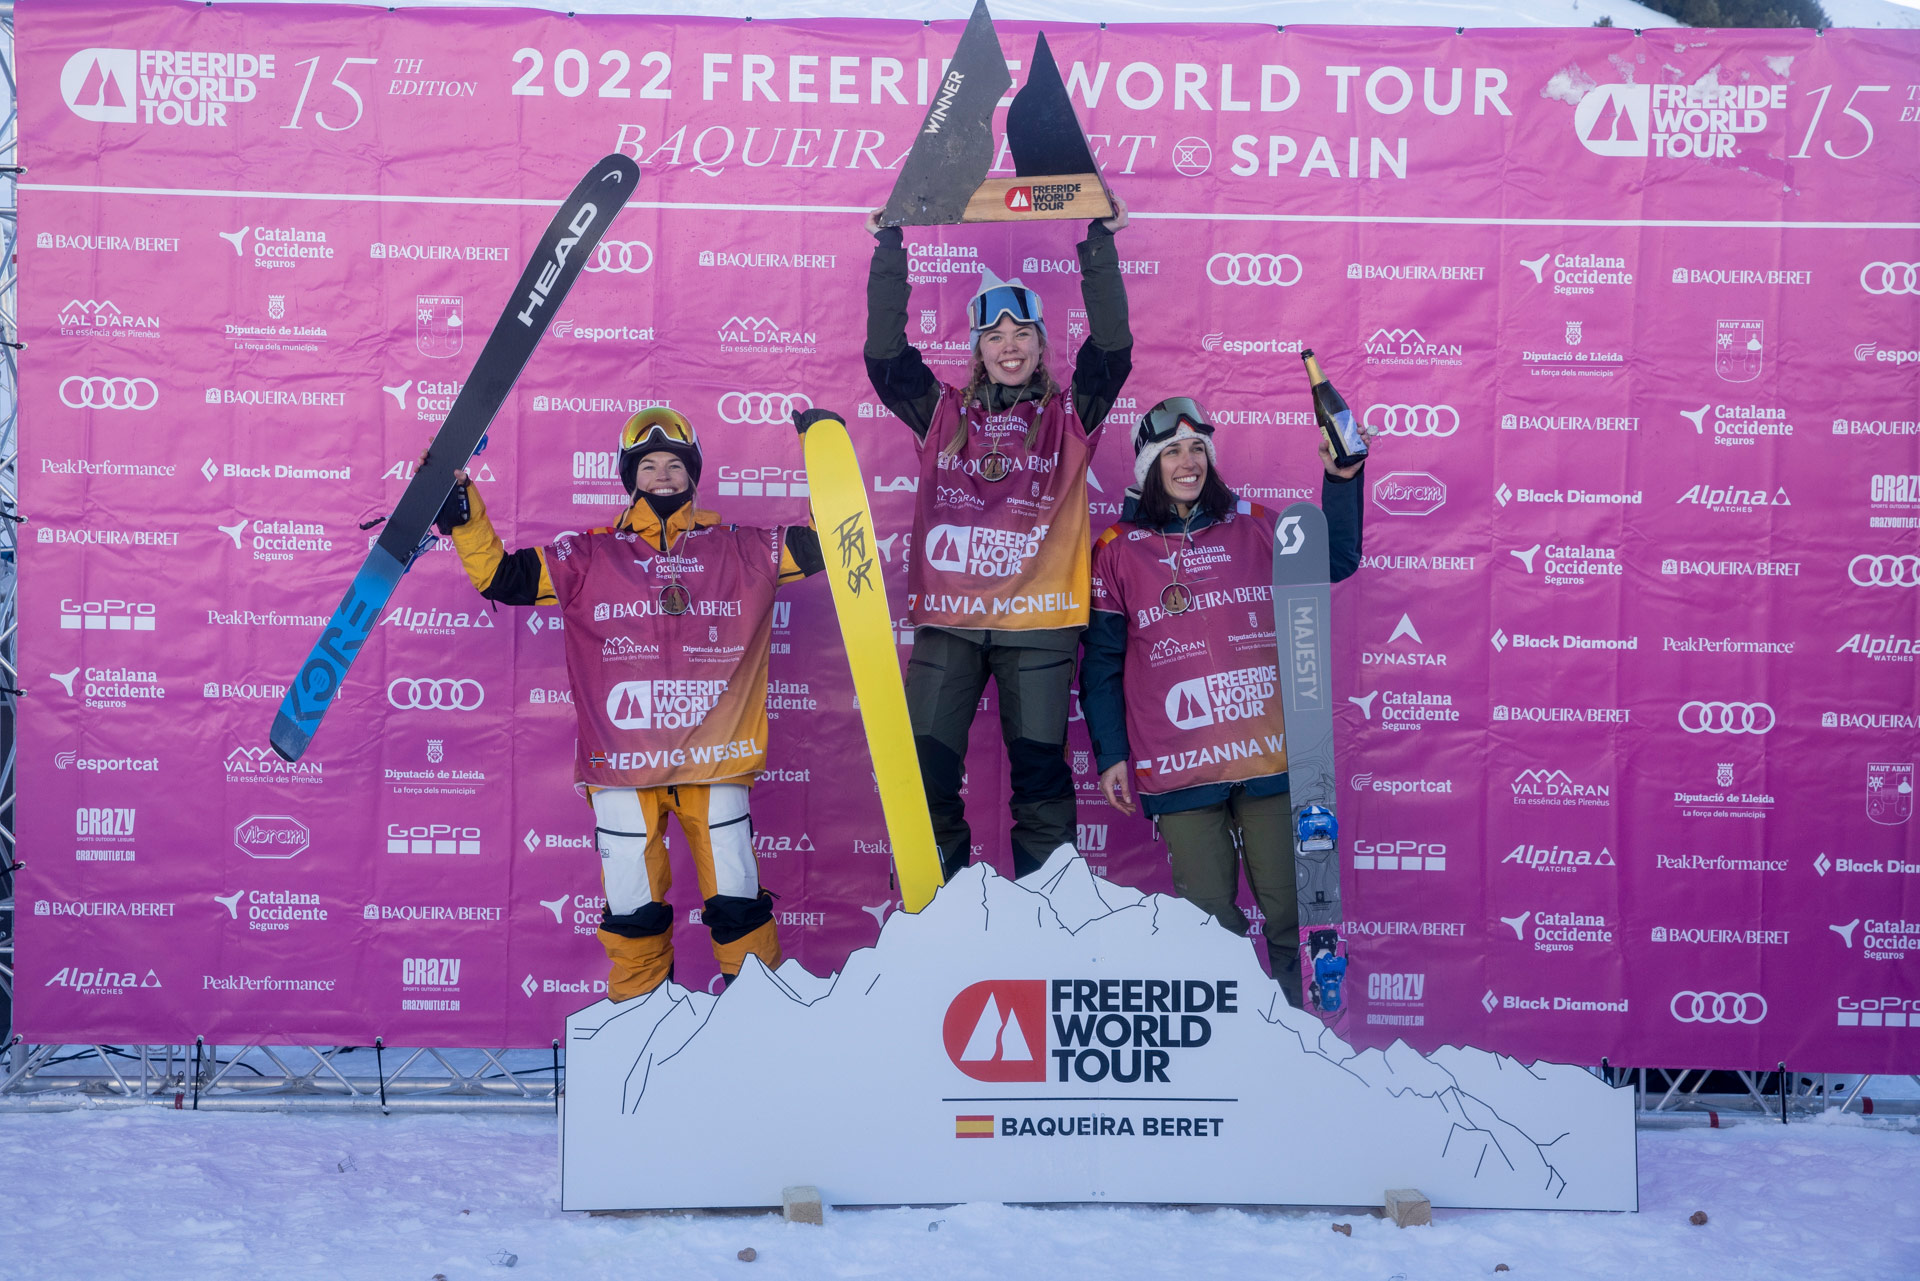 The women's ski podium at the 2022 Freeride World Tour stop in Baquiera Beret.